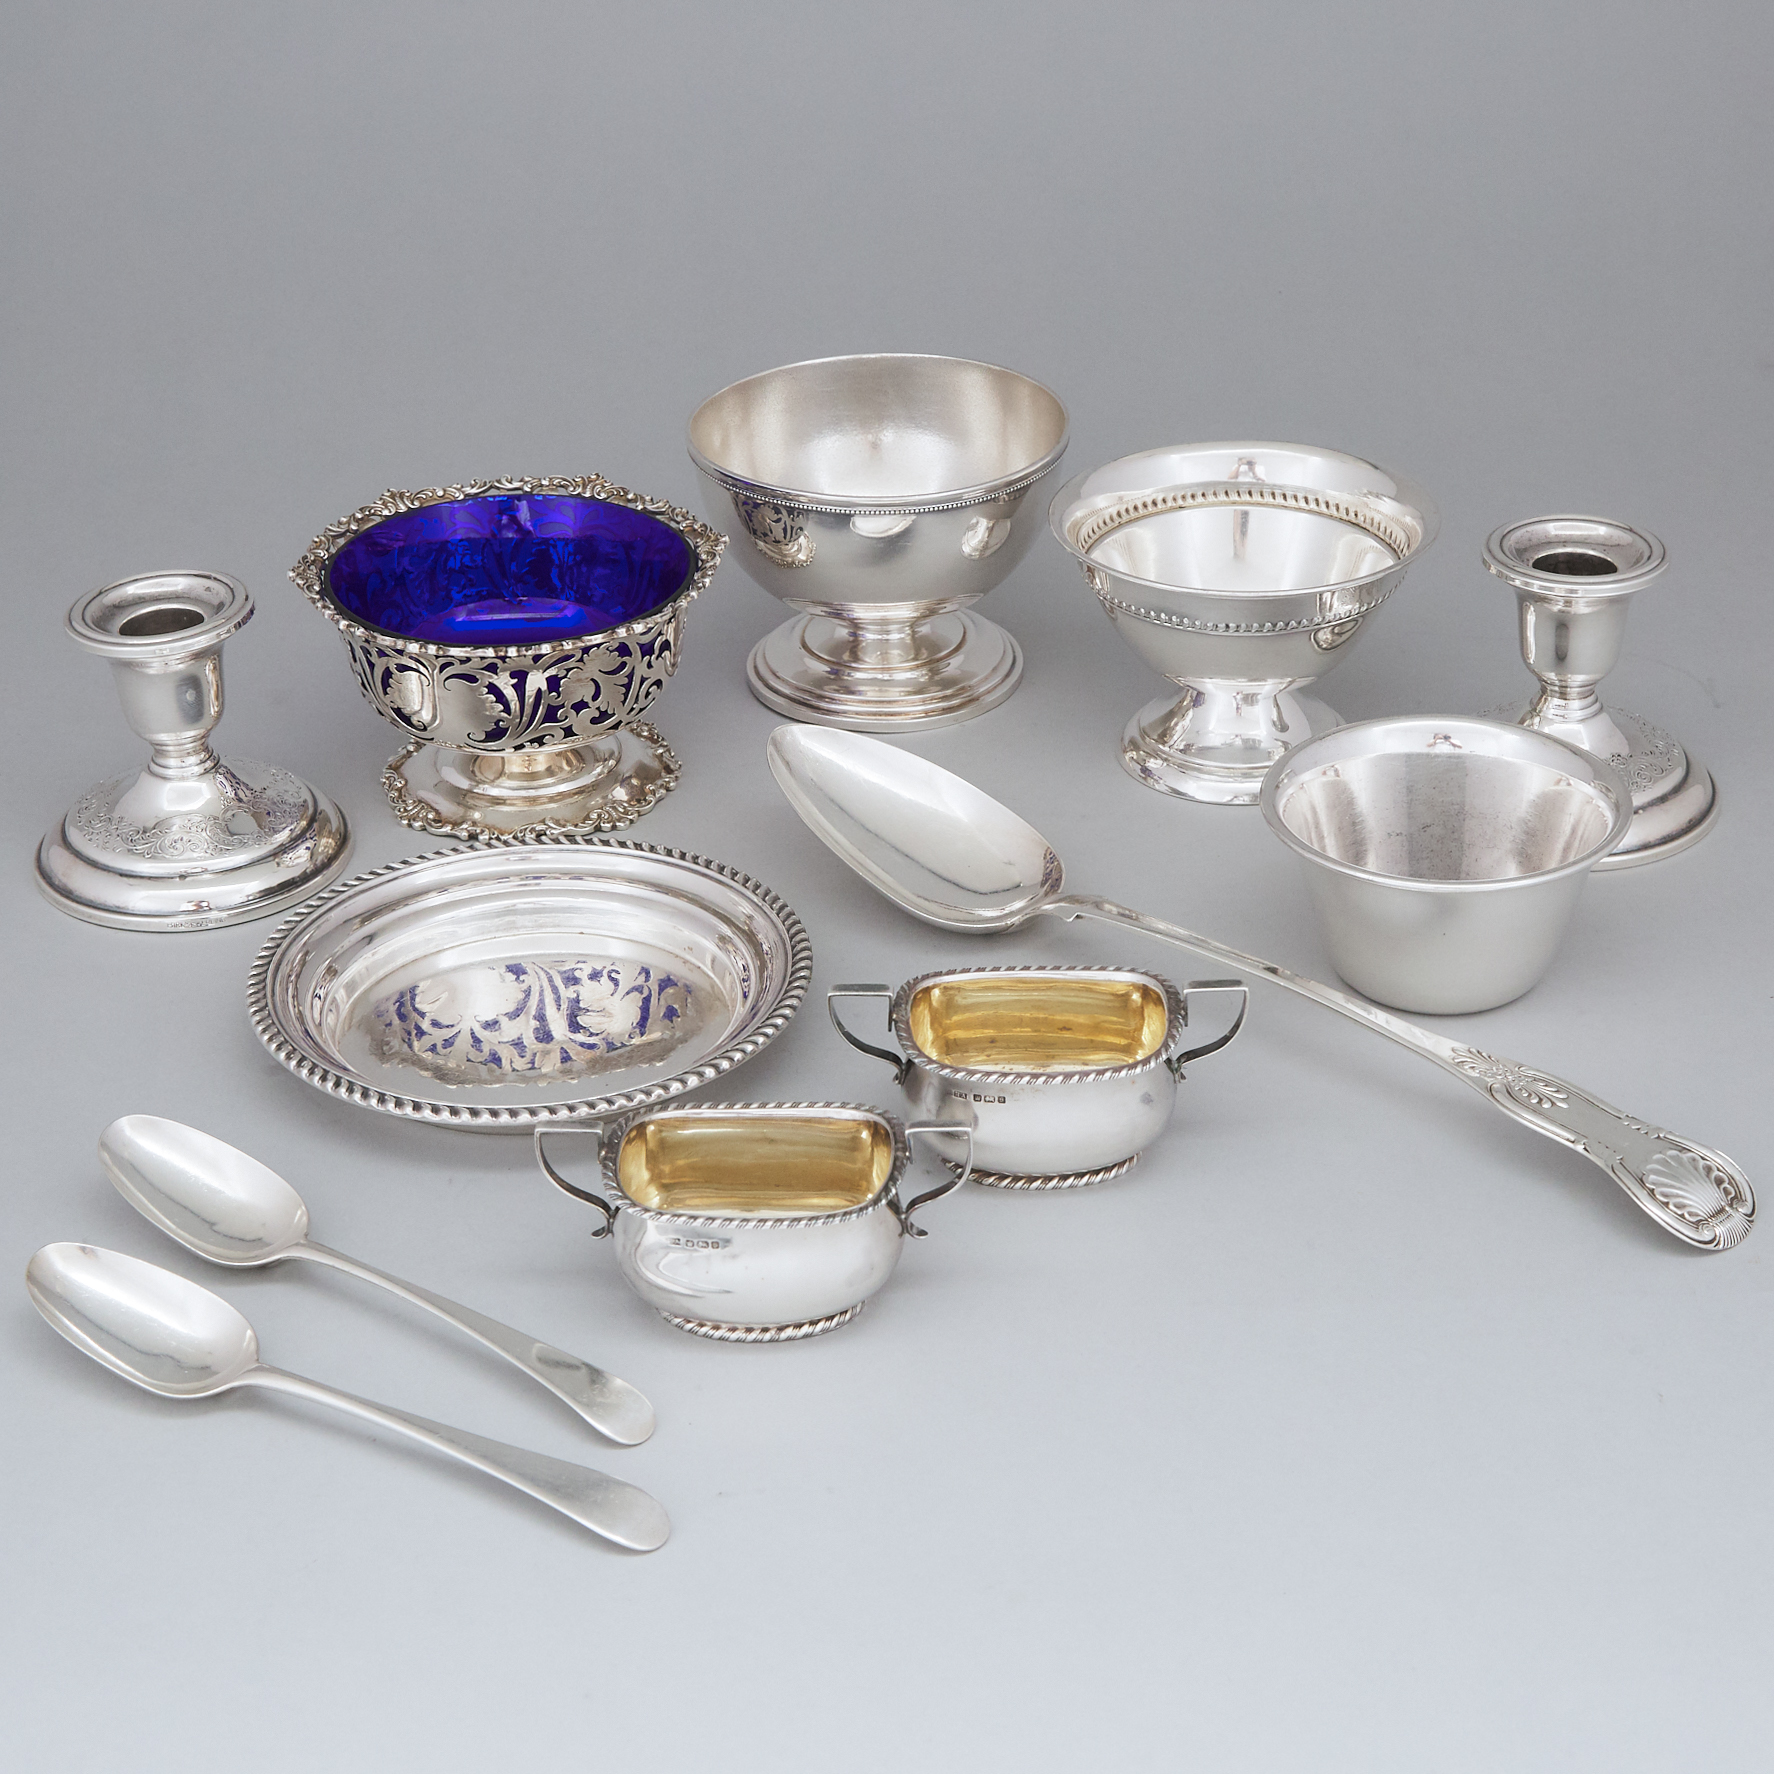 Group of English, Scottish and North American Silver, 18th-20th century